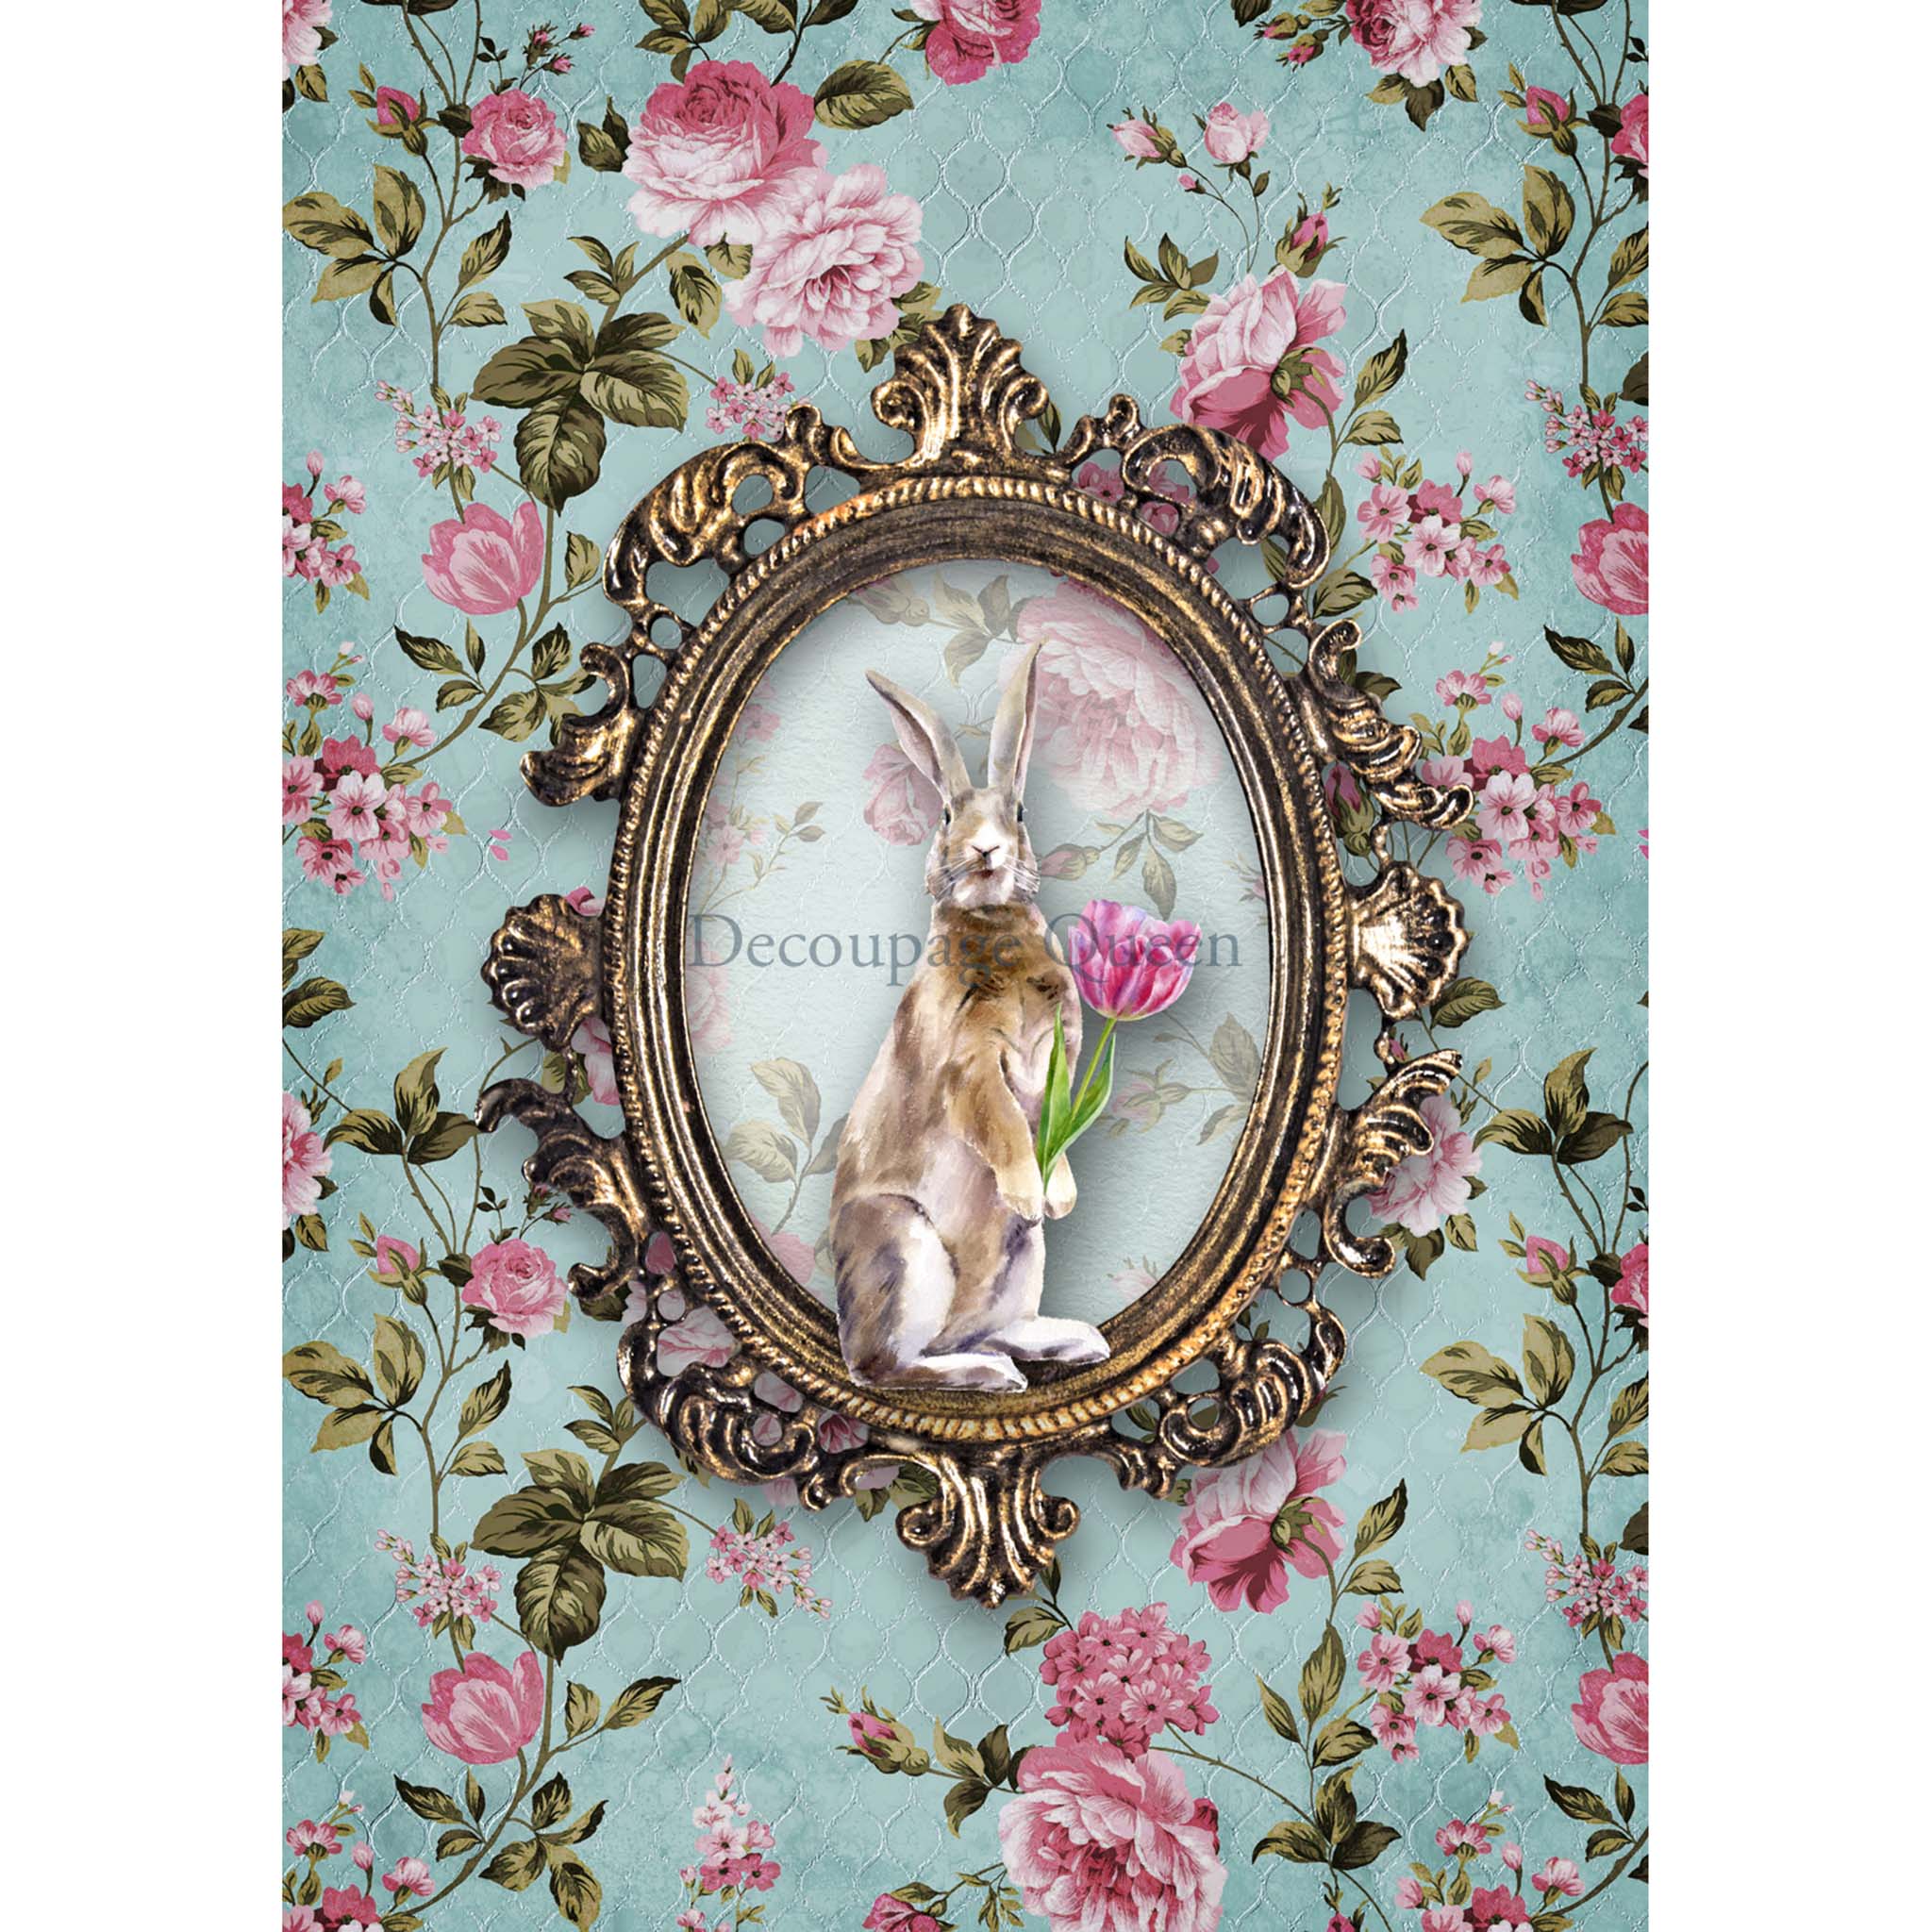 A3 rice paper design that features a charming brown bunny holding a tulip in an ornate frame, surrounded by pink flowers on an aqua background. White borders are on the sides.